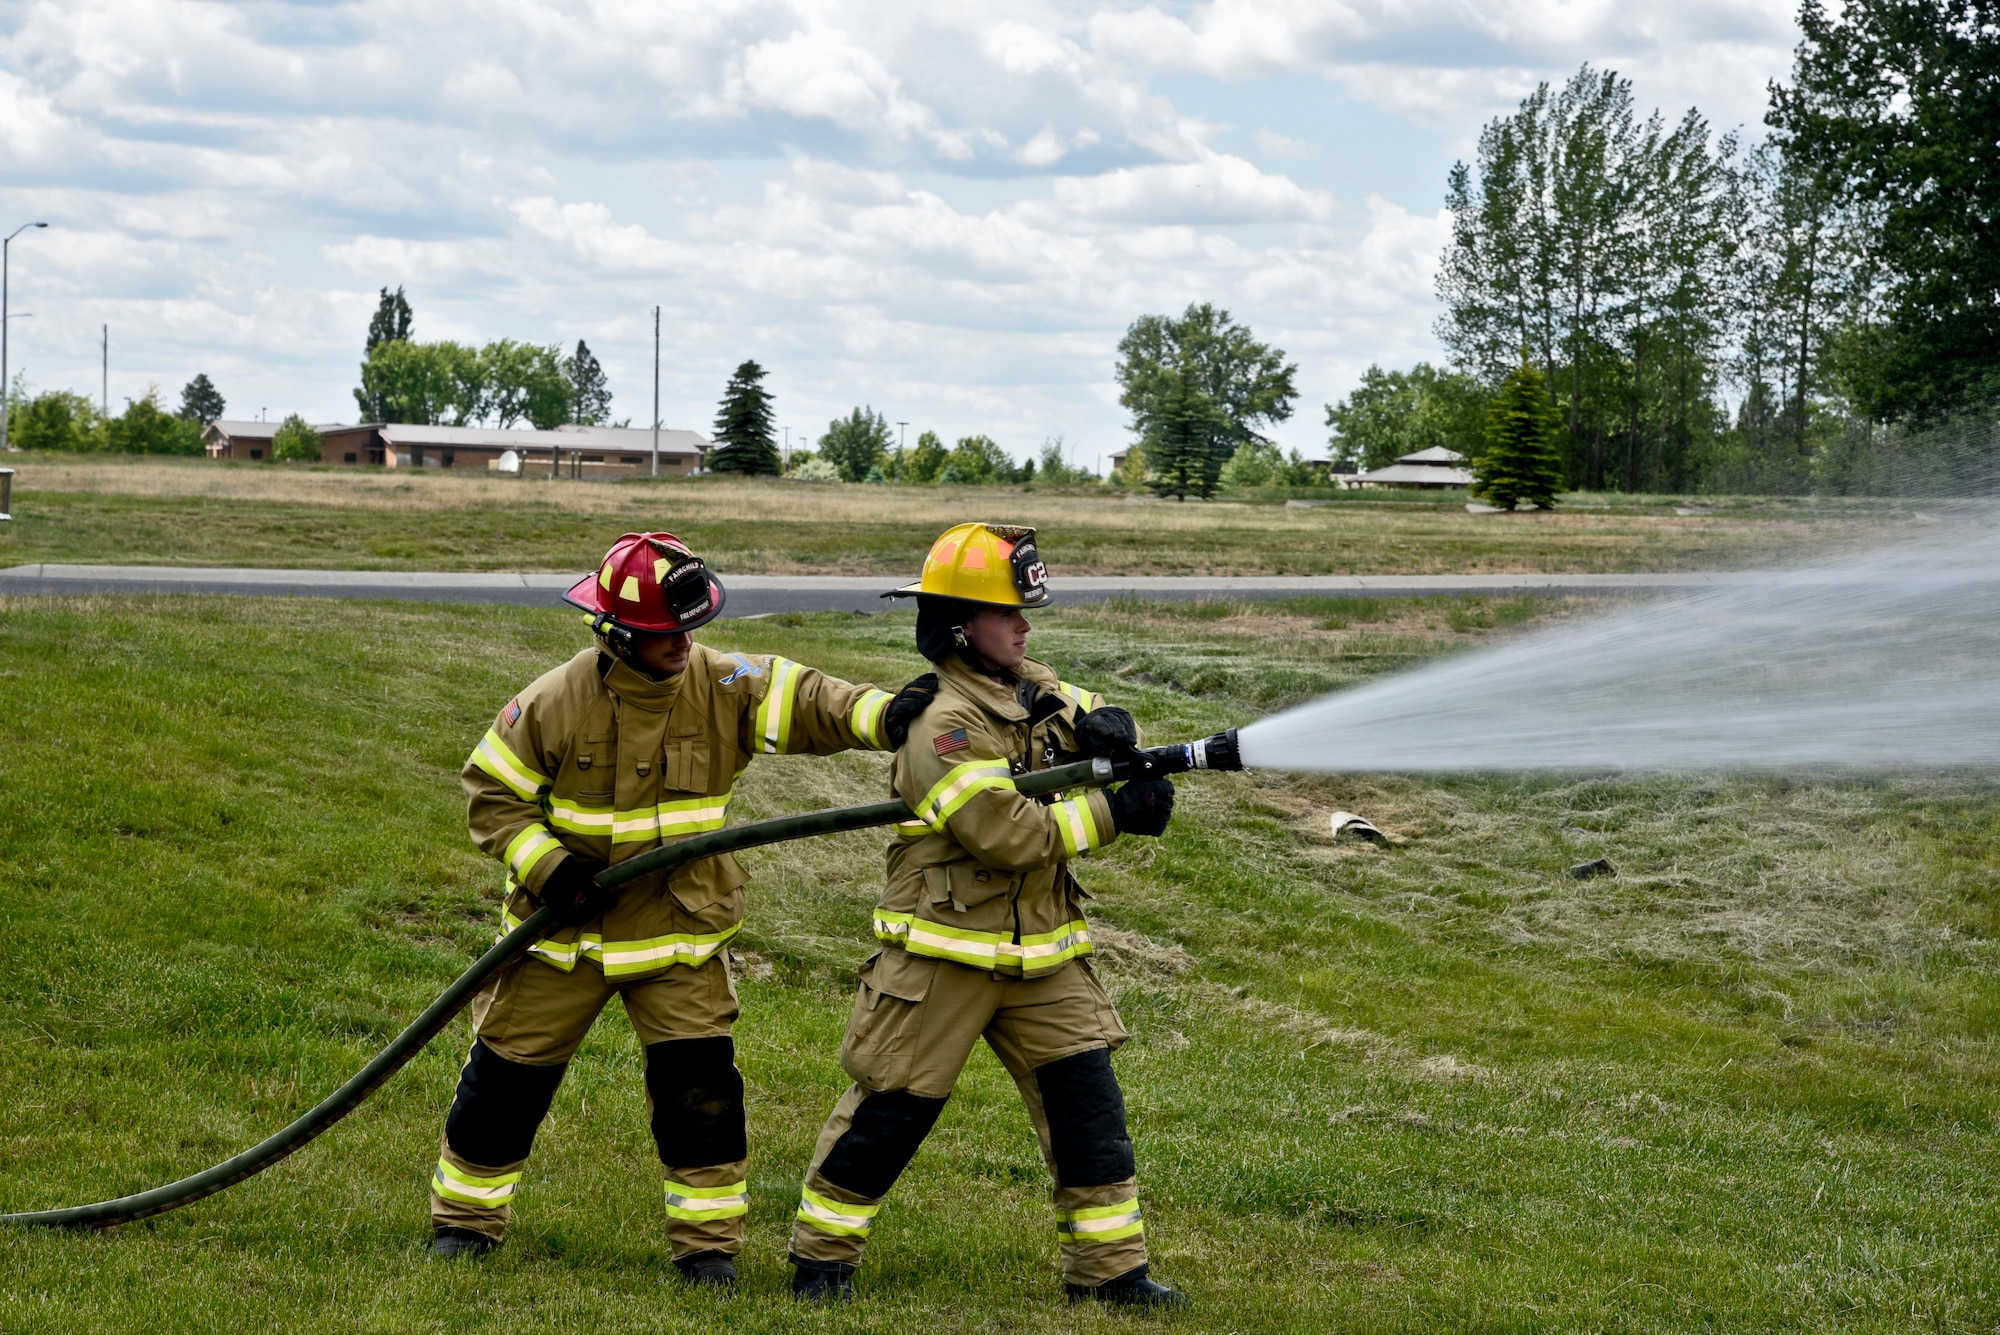 Staff Sgt. Patrick Guthrie, 92nd Civil Engineer Squadron firefighter crew chief, supports Airman 1st Class Shawn Mercer, 92nd CES firefighter, while demonstrating how to properly use a fire hose May 25, 2016, at Fairchild Air Force Base, Wash. According to Mercer, knowing how to control the path of the fire and protecting the surrounding buildings, is one of the most important skills a firefighter possesses. (U.S. Air Force photo/Airman 1st Class Taylor Shelton)